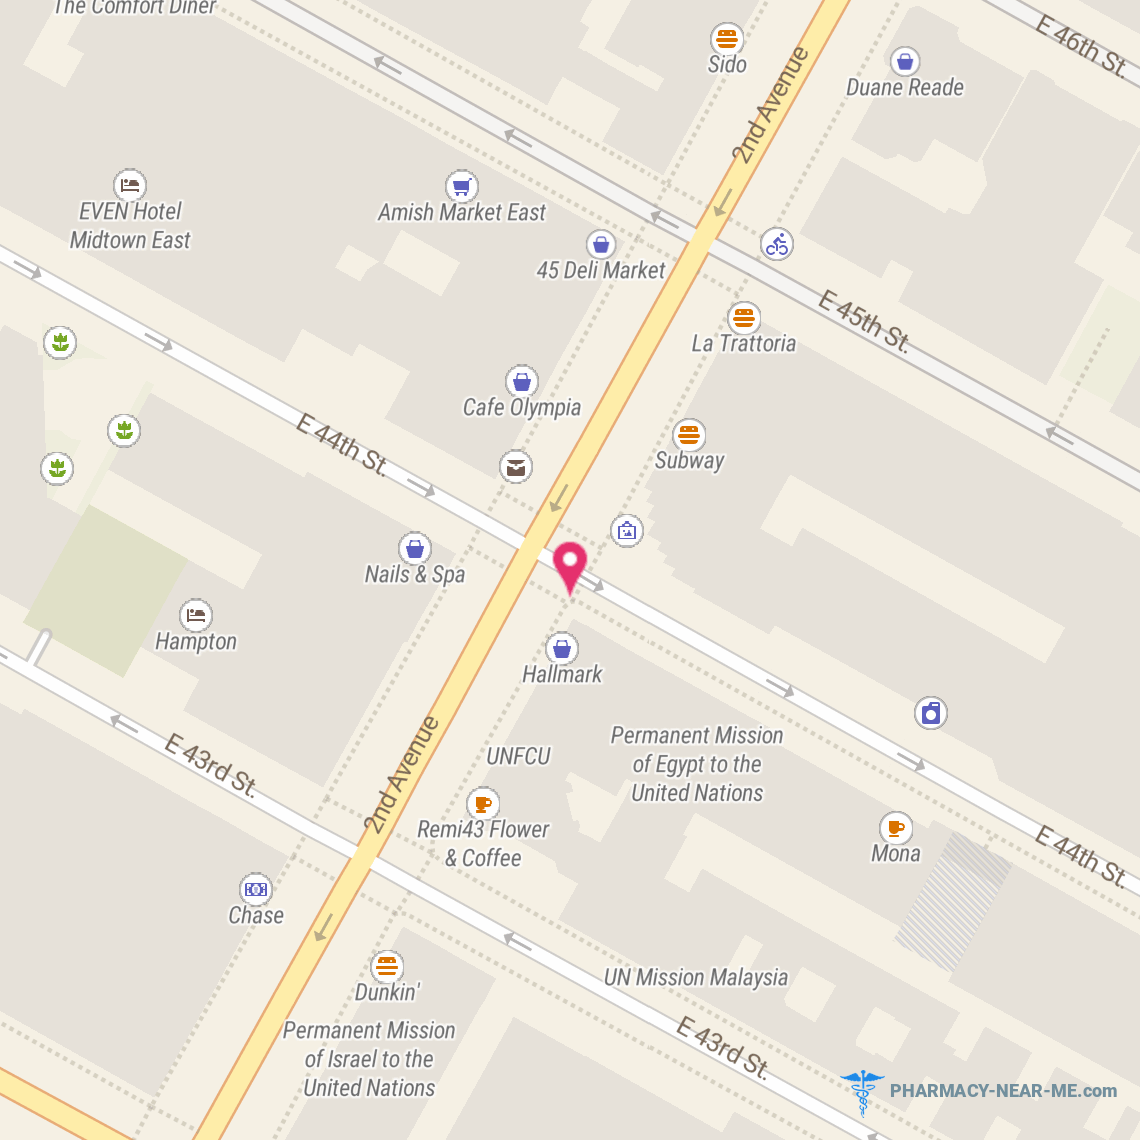 UN PLAZA PHARMACY - Pharmacy Hours, Phone, Reviews & Information: 800 2nd Avenue, NY, New York 10017, United States